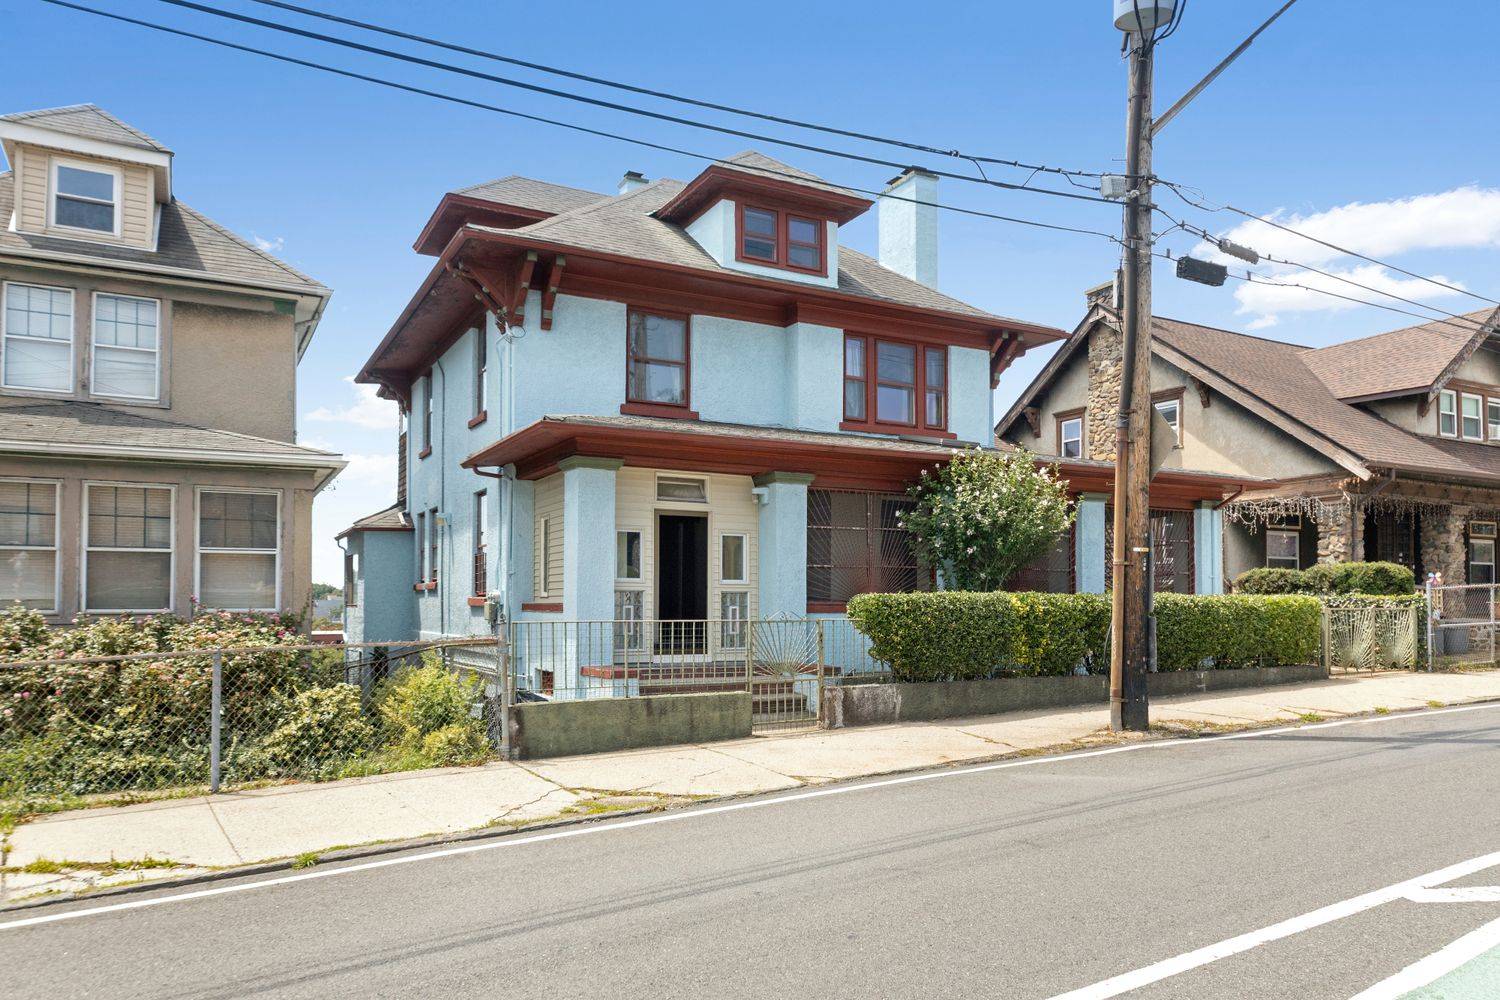 A classic 1910 beauty located in historic Stapleton Tompkinsville.